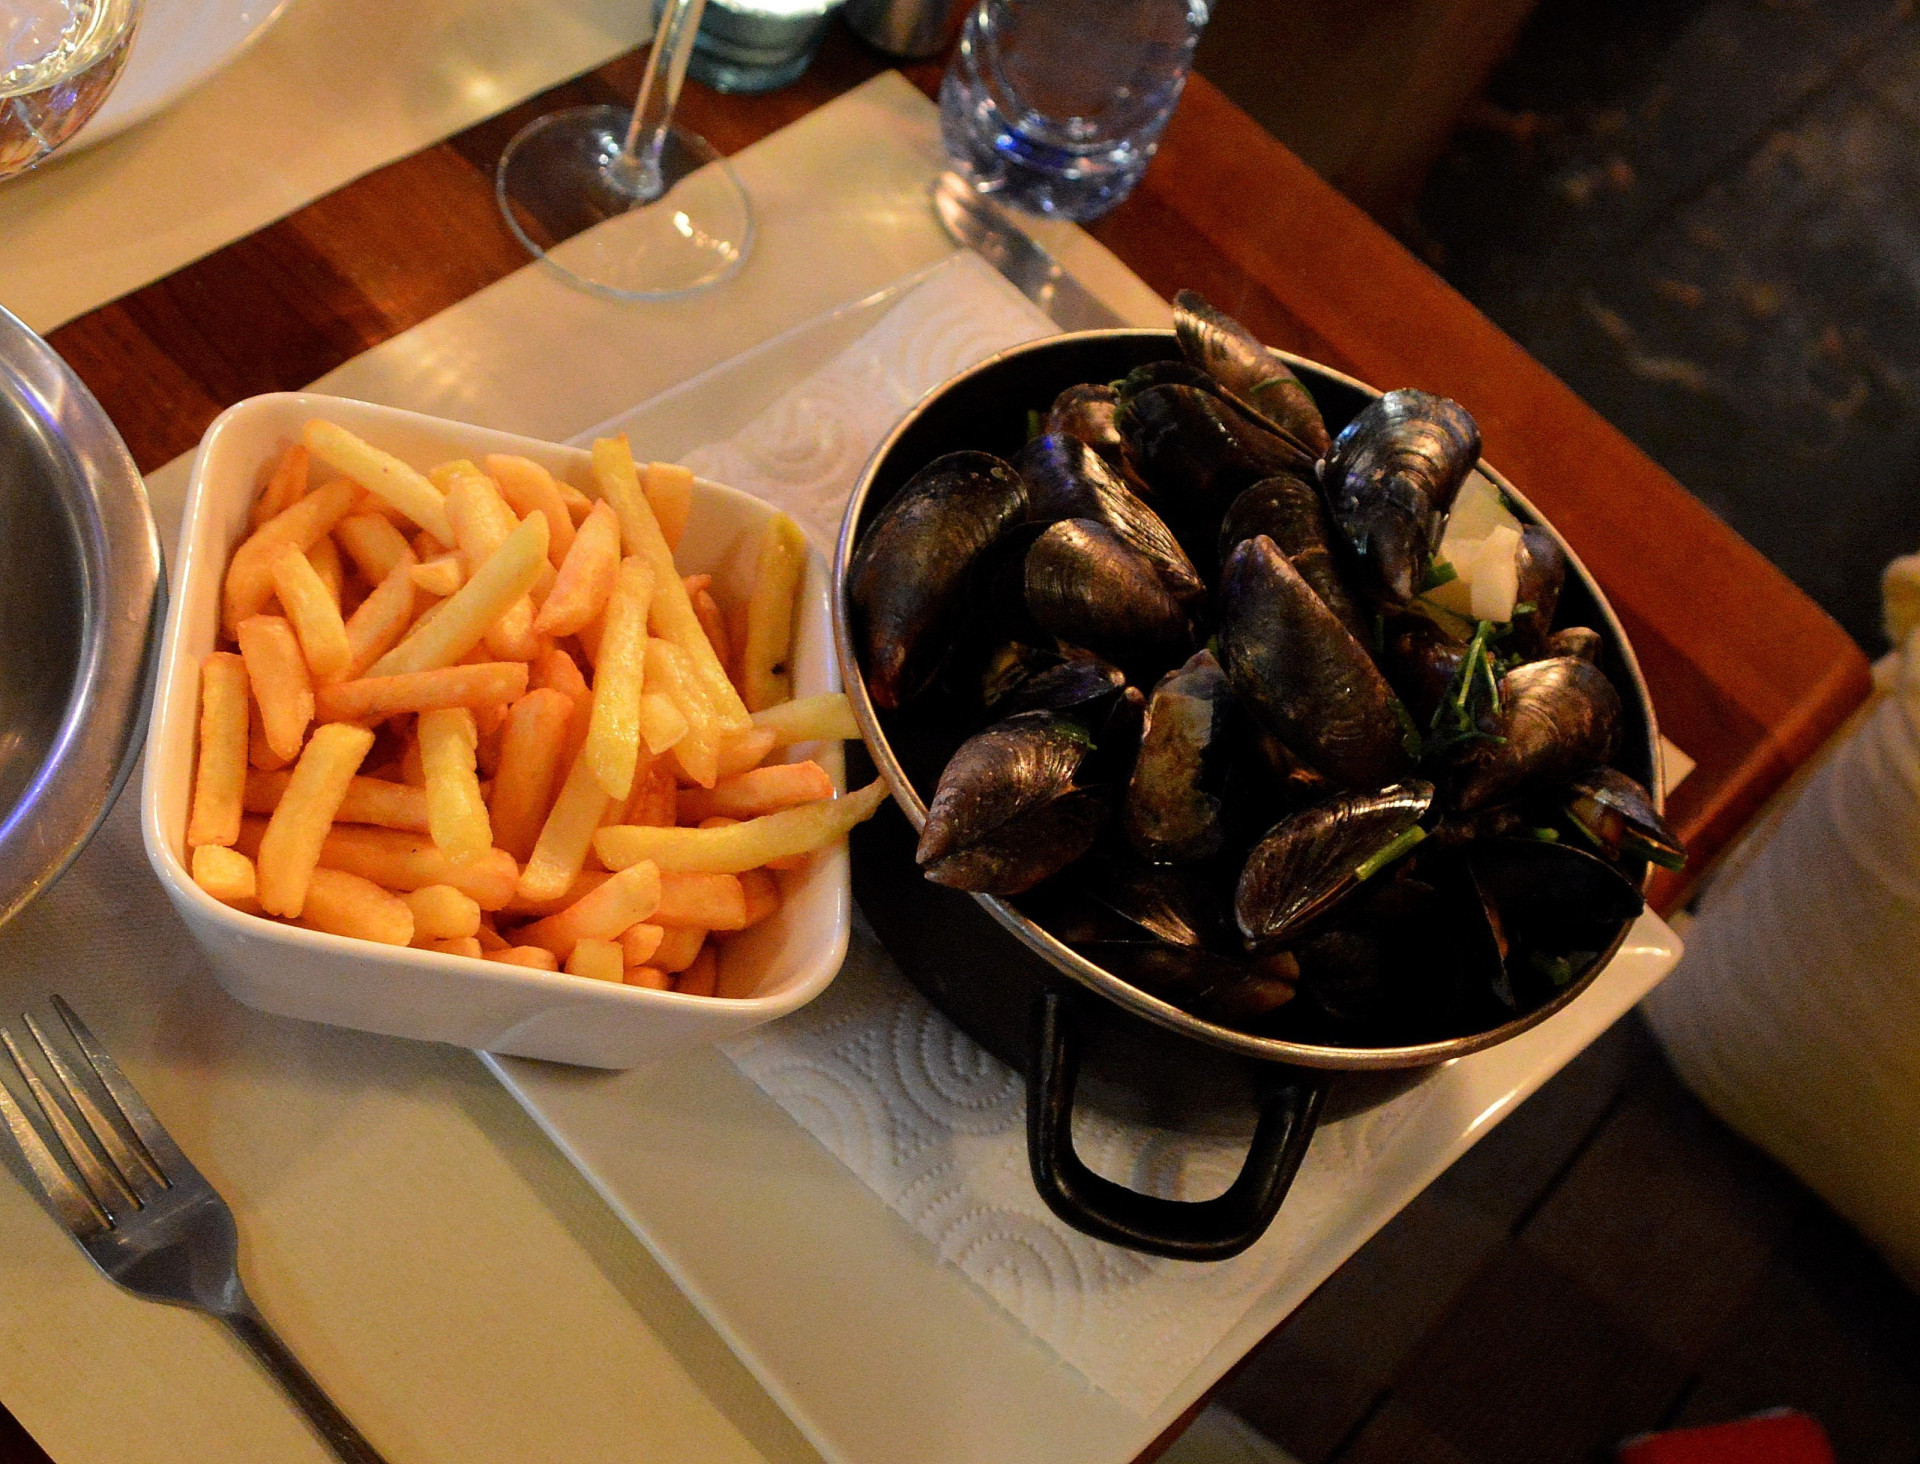 The popular main dish of mussels and fries is a true Belgian specialty. Fortunately for locals and tourists alike, it has a very long season: it runs from July through mid-April of the following year.<p><a href="https://www.msn.com/en-us/community/channel/vid-7xx8mnucu55yw63we9va2gwr7uihbxwc68fxqp25x6tg4ftibpra?cvid=94631541bc0f4f89bfd59158d696ad7e">Follow us and access great exclusive content every day</a></p>